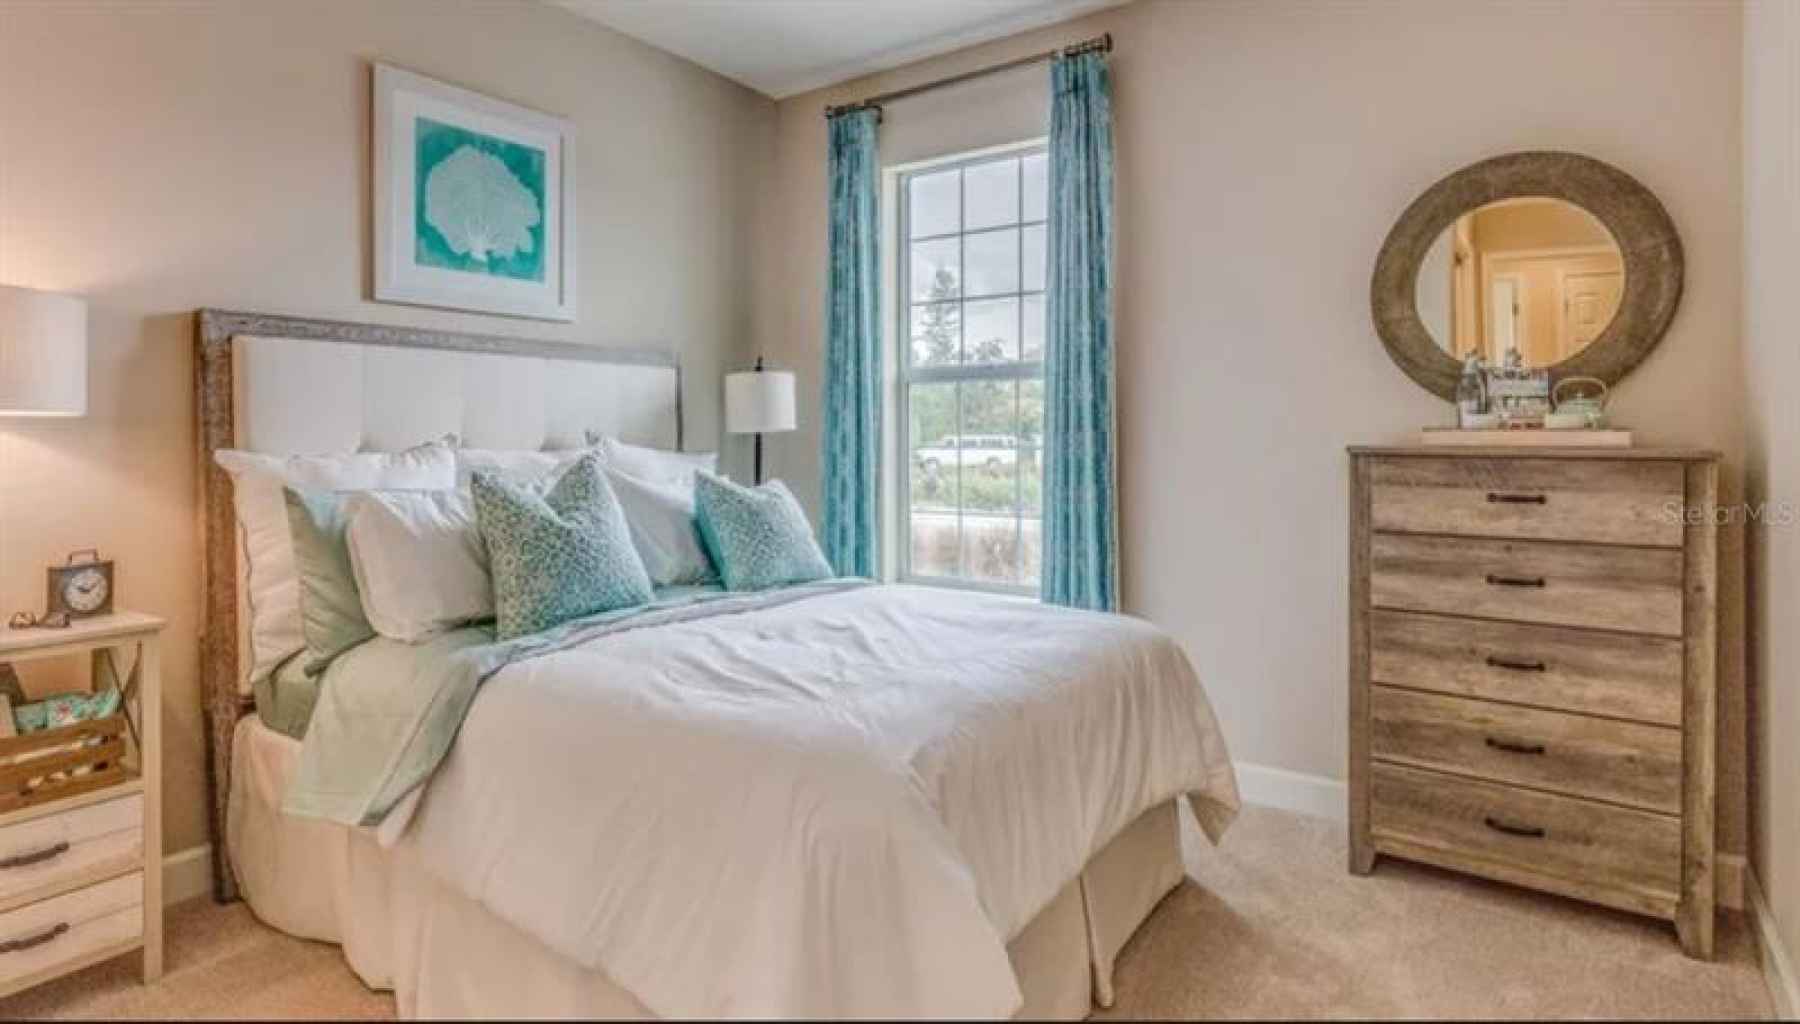 * REPRESENTATIVE PHOTO. Plush carpet and natural light adorn this well-designed secondary bedroom.